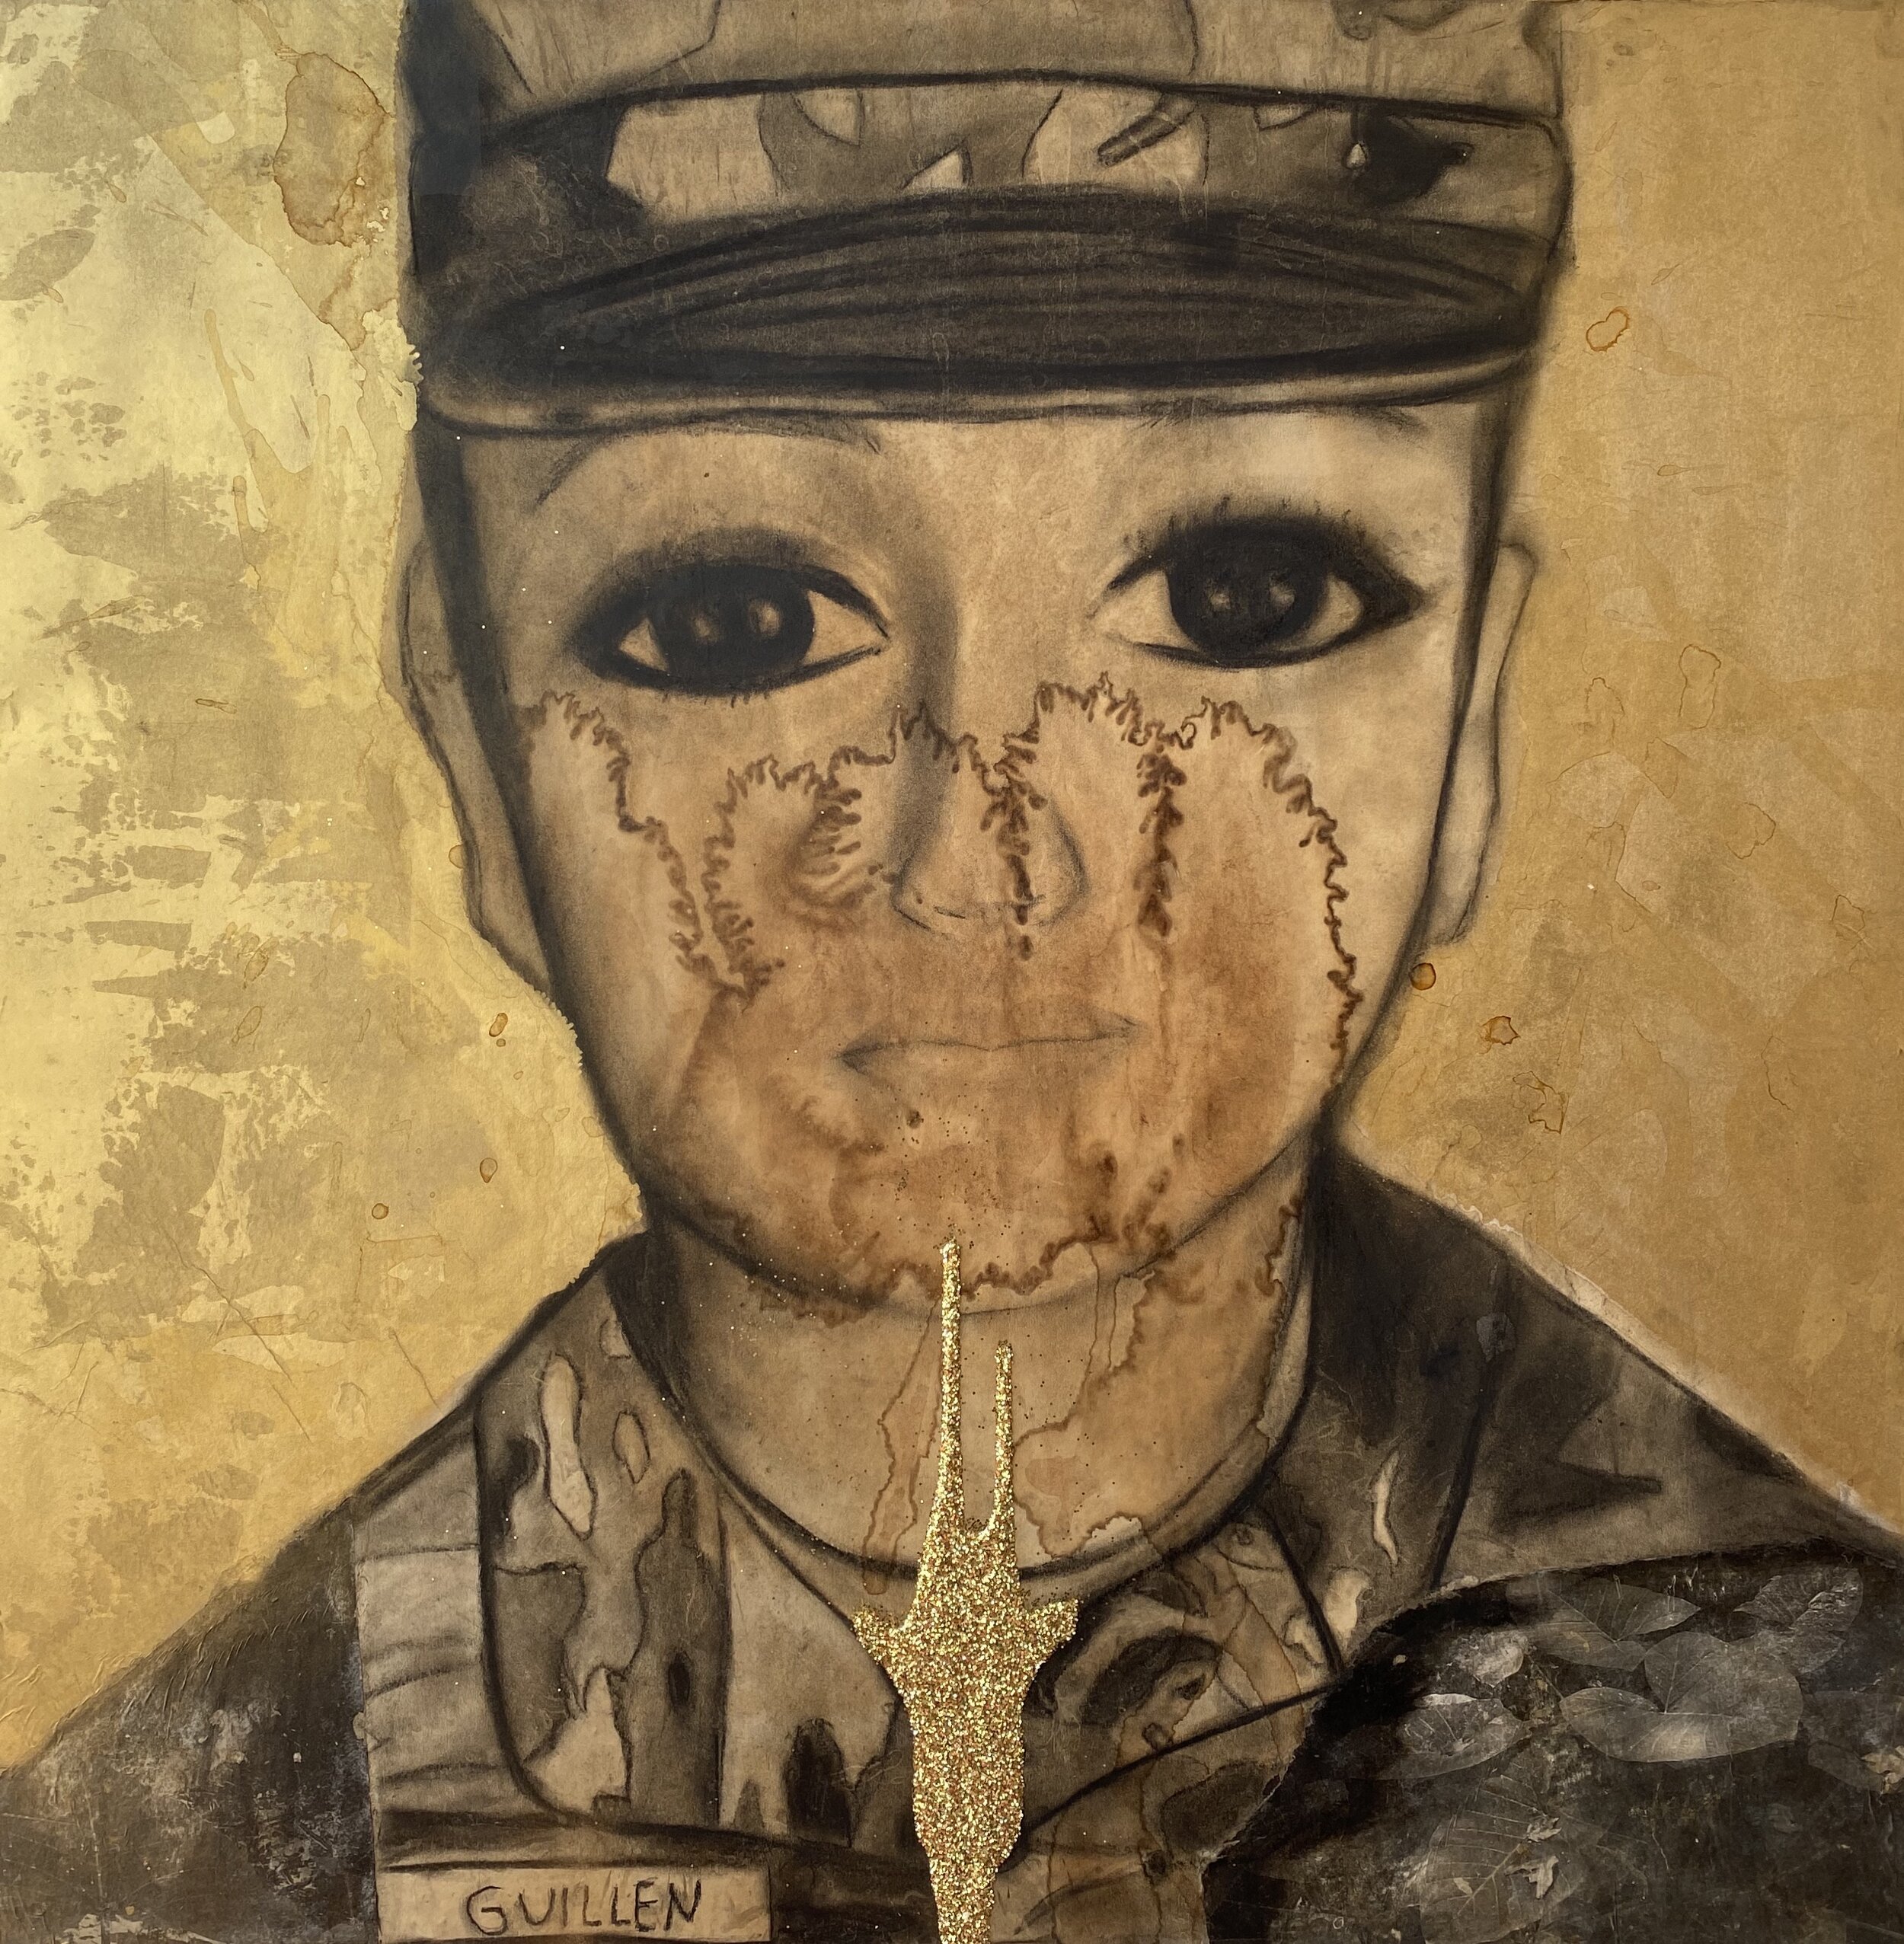  Joan Zamora   They Tried to Silence Her: Vanessa Guillén , 2020  mixed media: charcoal, coffee, spray paint, glitter and photocopy transfer on paper/ wood 35 x 35 in 